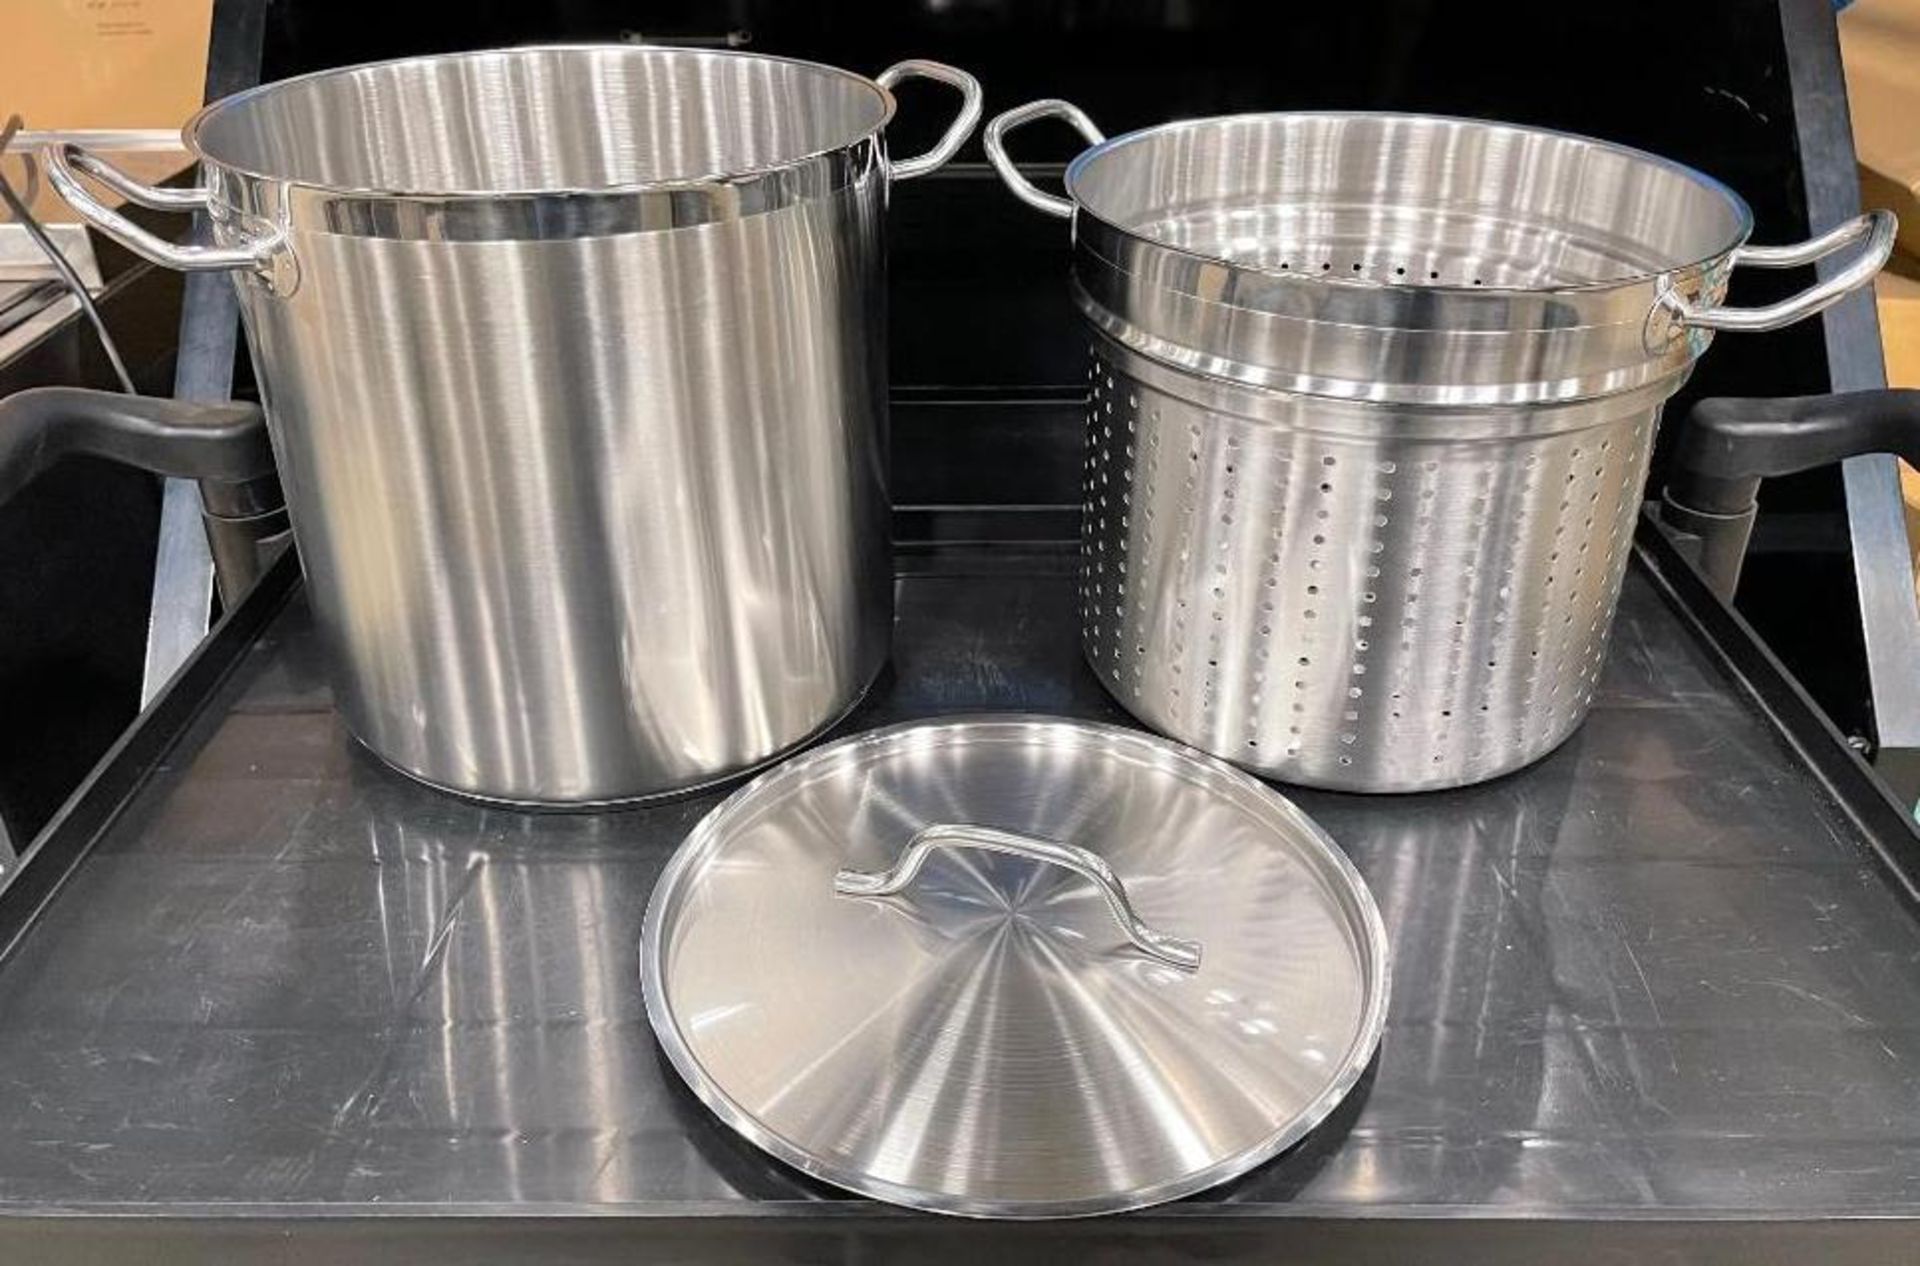 20QT HEAVY DUTY STAINLESS STOCK POT INDUCTION CAPABLE & STEAMER BASKET, JR 47202 & 47204 - NEW